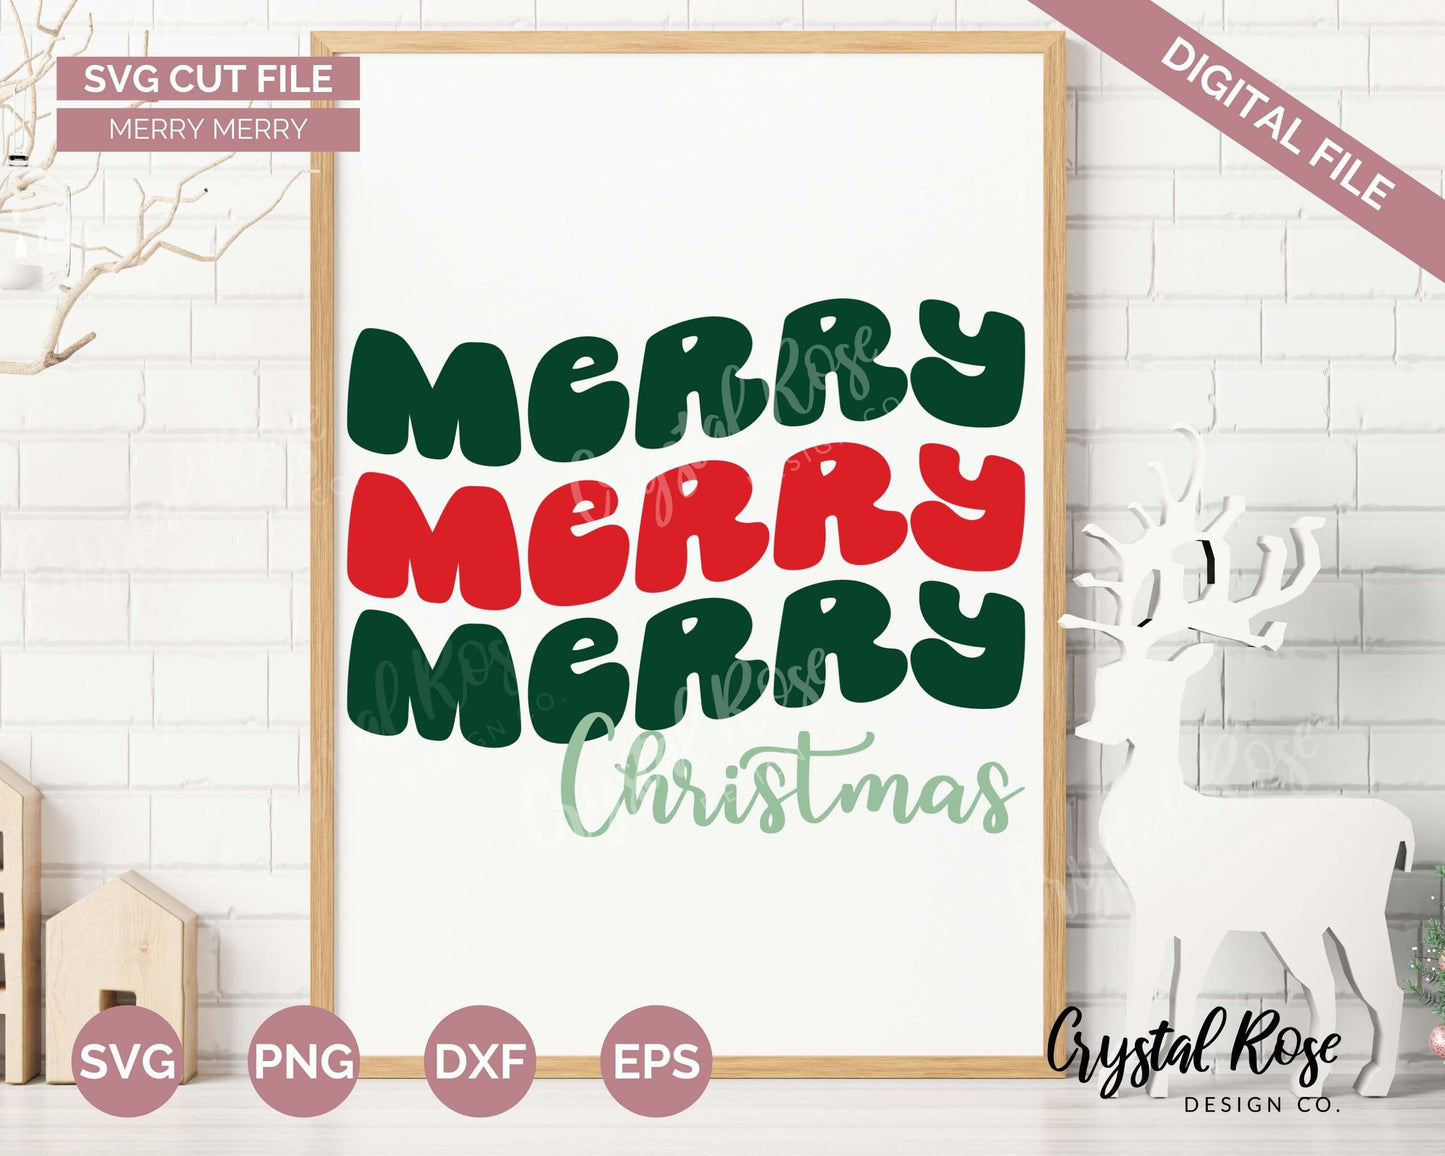 Retro Merry Christmas SVG, Christmas SVG, Digital Download, Cricut, Silhouette, Glowforge (includes svg/png/dxf/eps)